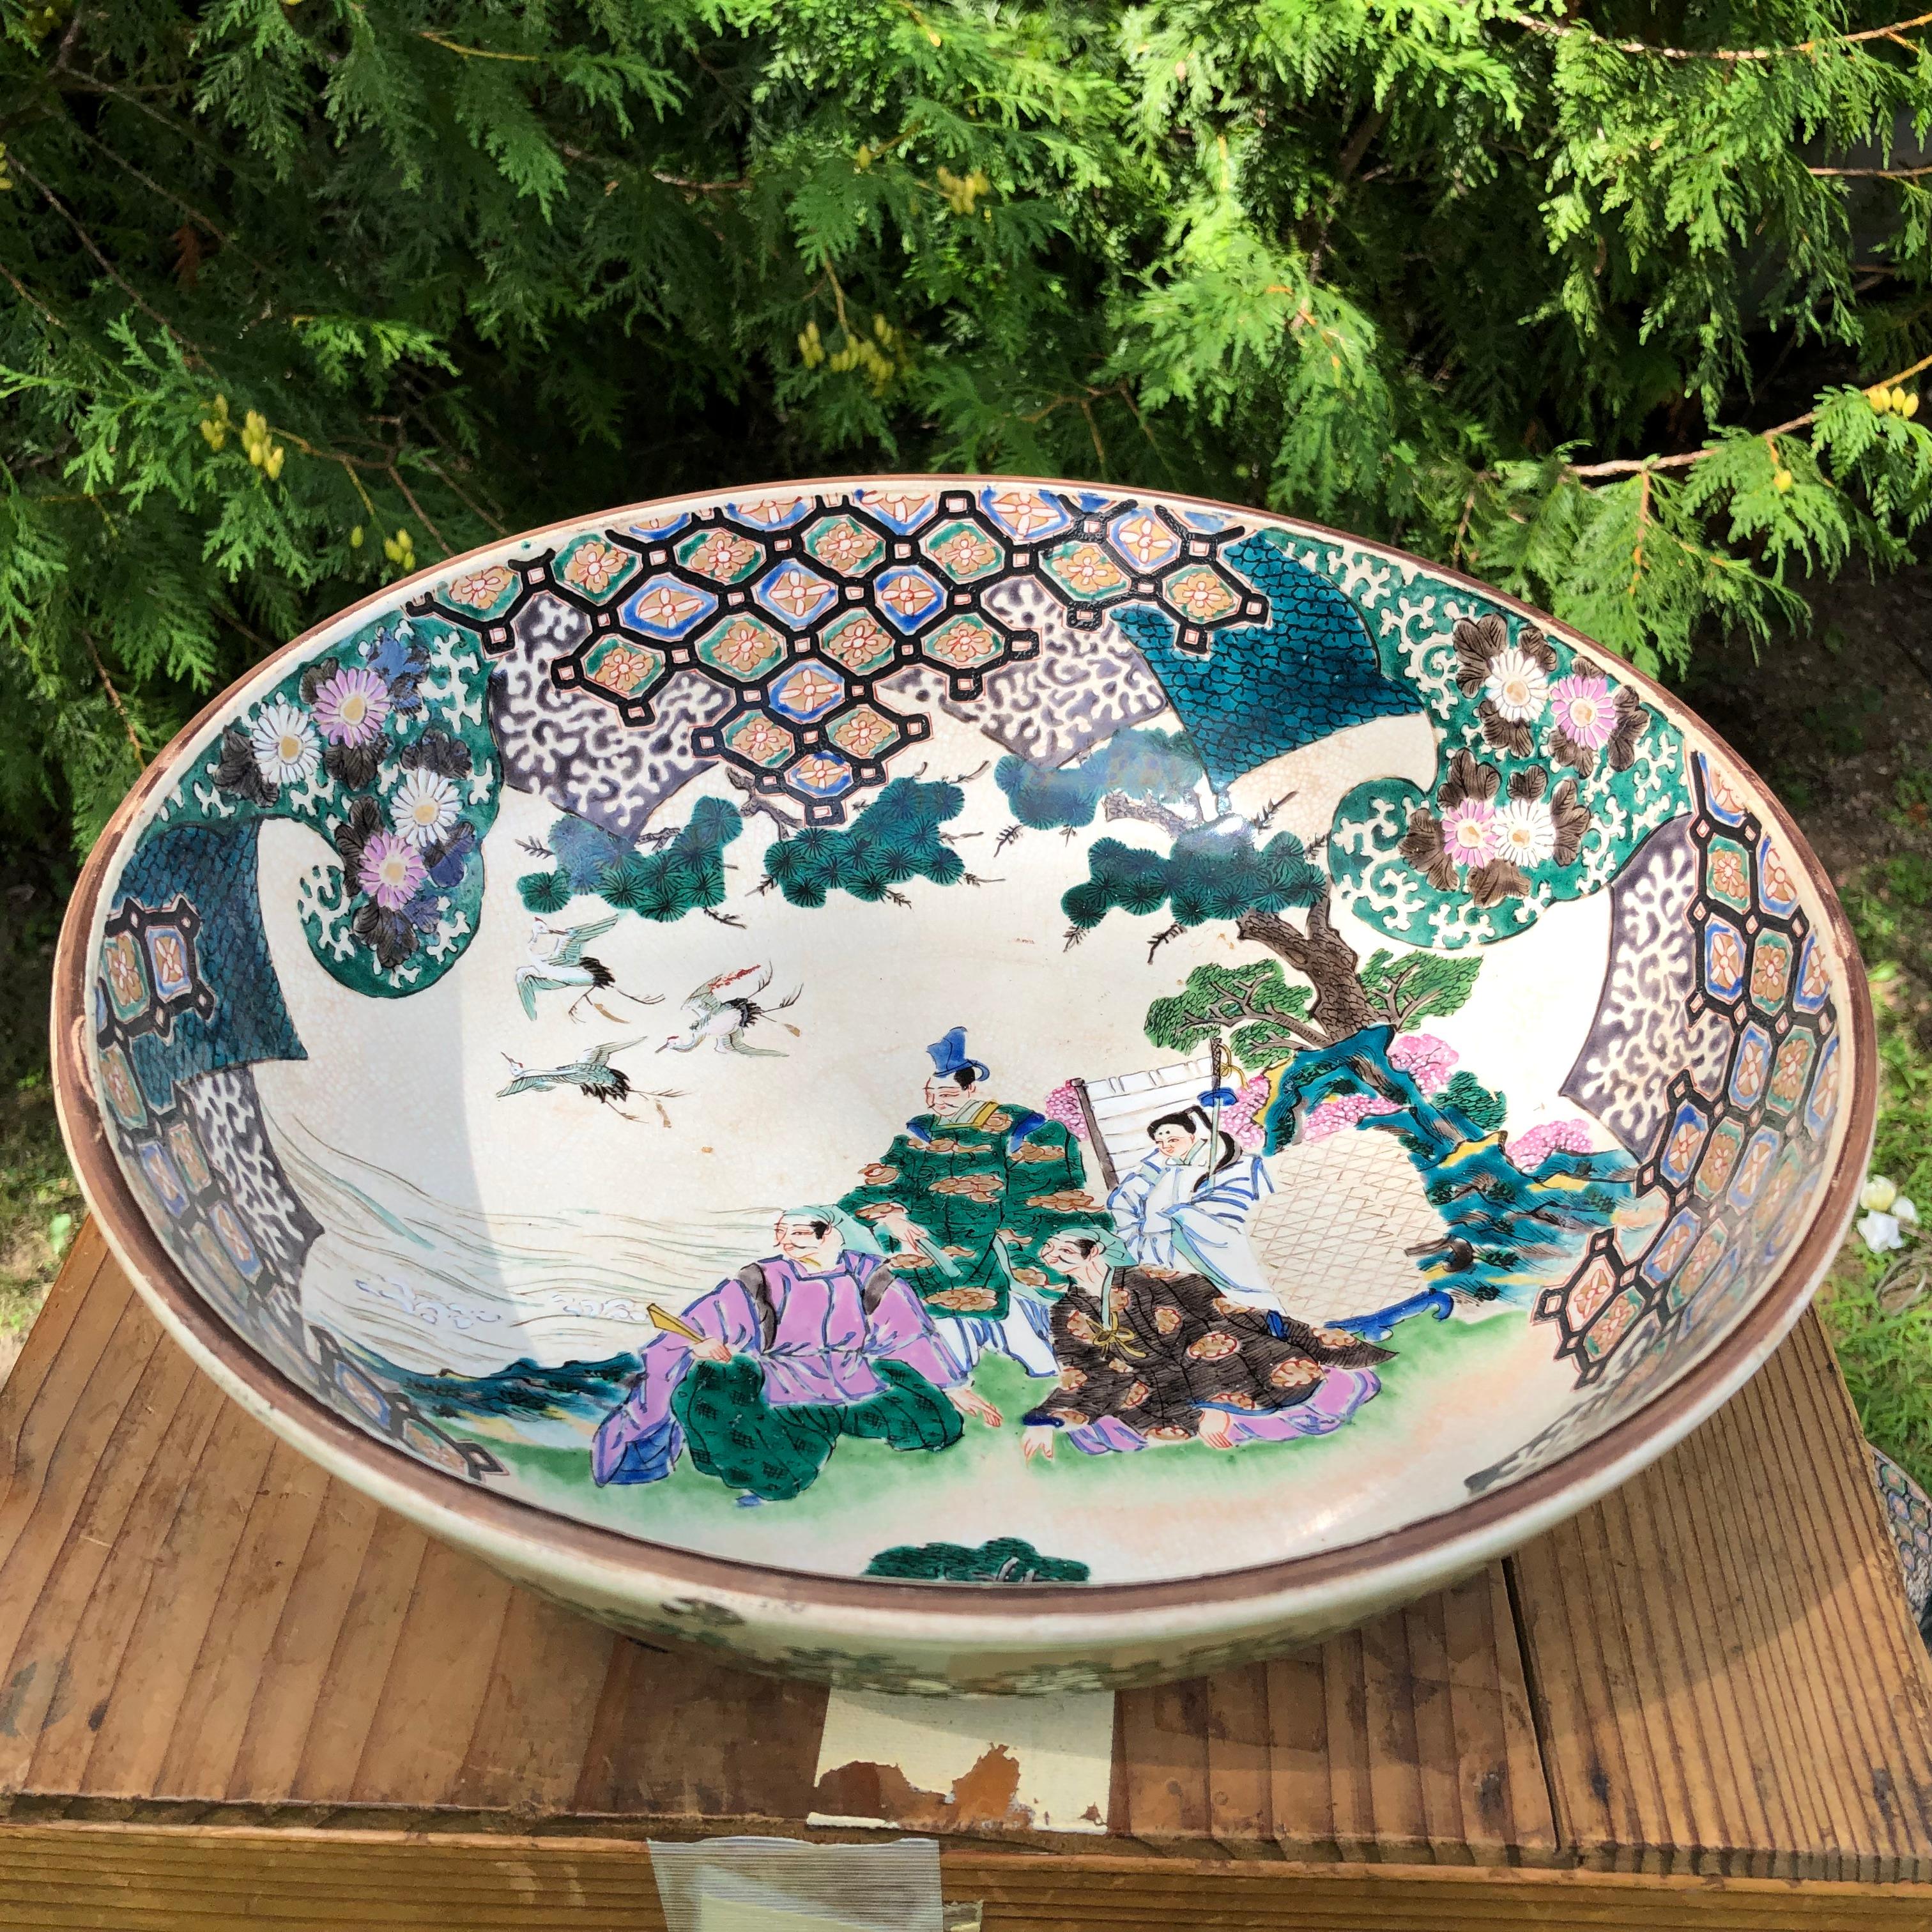 From our recent Japanese Acquisition Travels- matching set three (3)  three gorgeous hand painted bowls from Japan in their original tomobako box.

Japan hard to find early set of three (3) brilliantly hand painted ceramic lush 